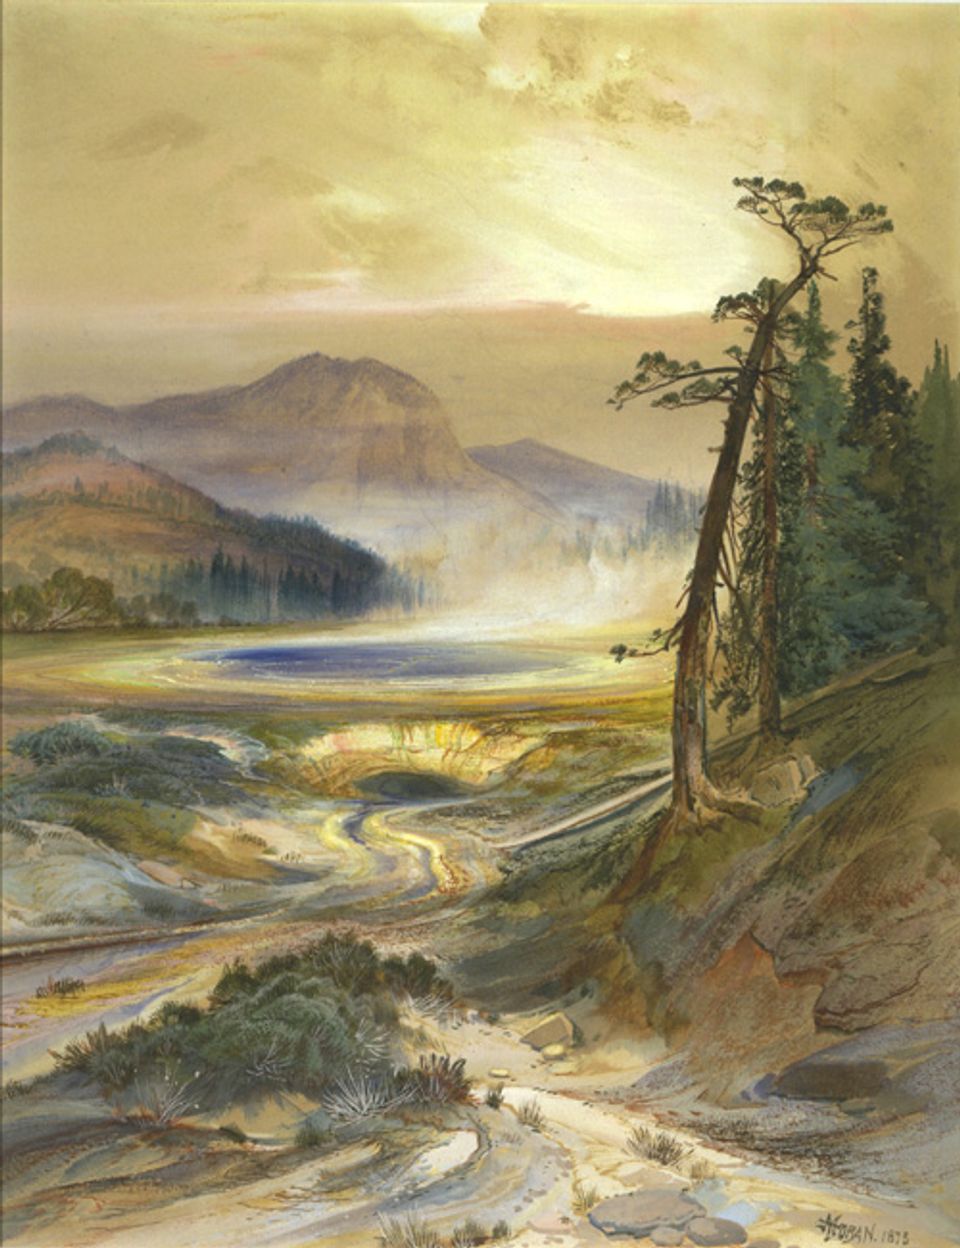 Moran's watercolor and pencil of the excelsior geyser in Yellowstone National Park.